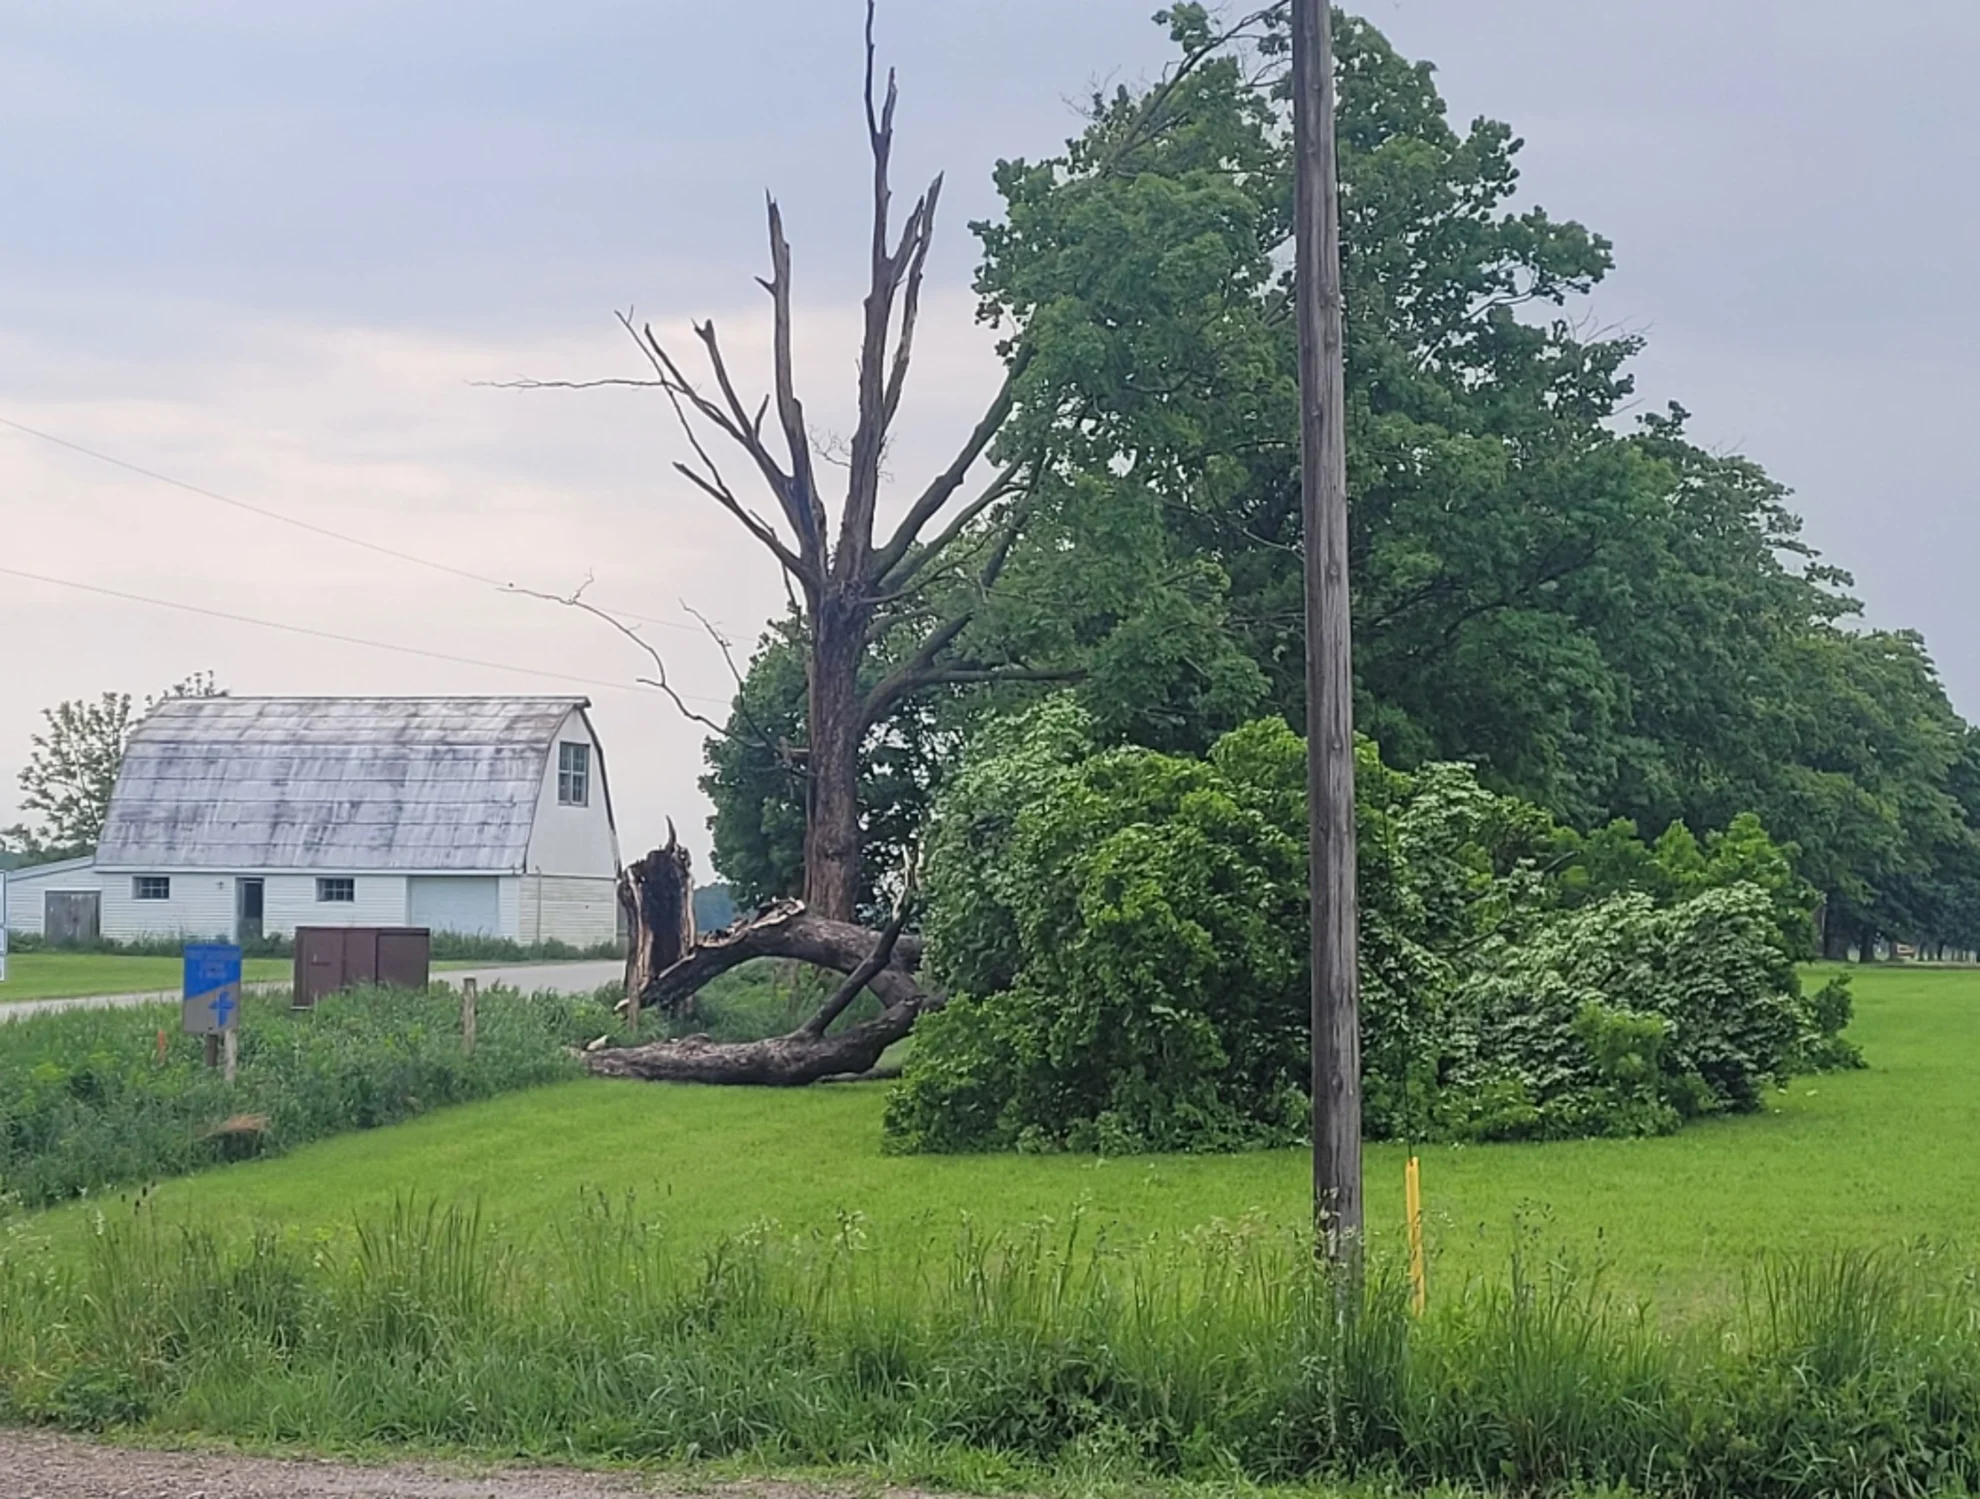 Tornado reported near the Ontario and Quebec border after Monday's damaging storms. See it, here